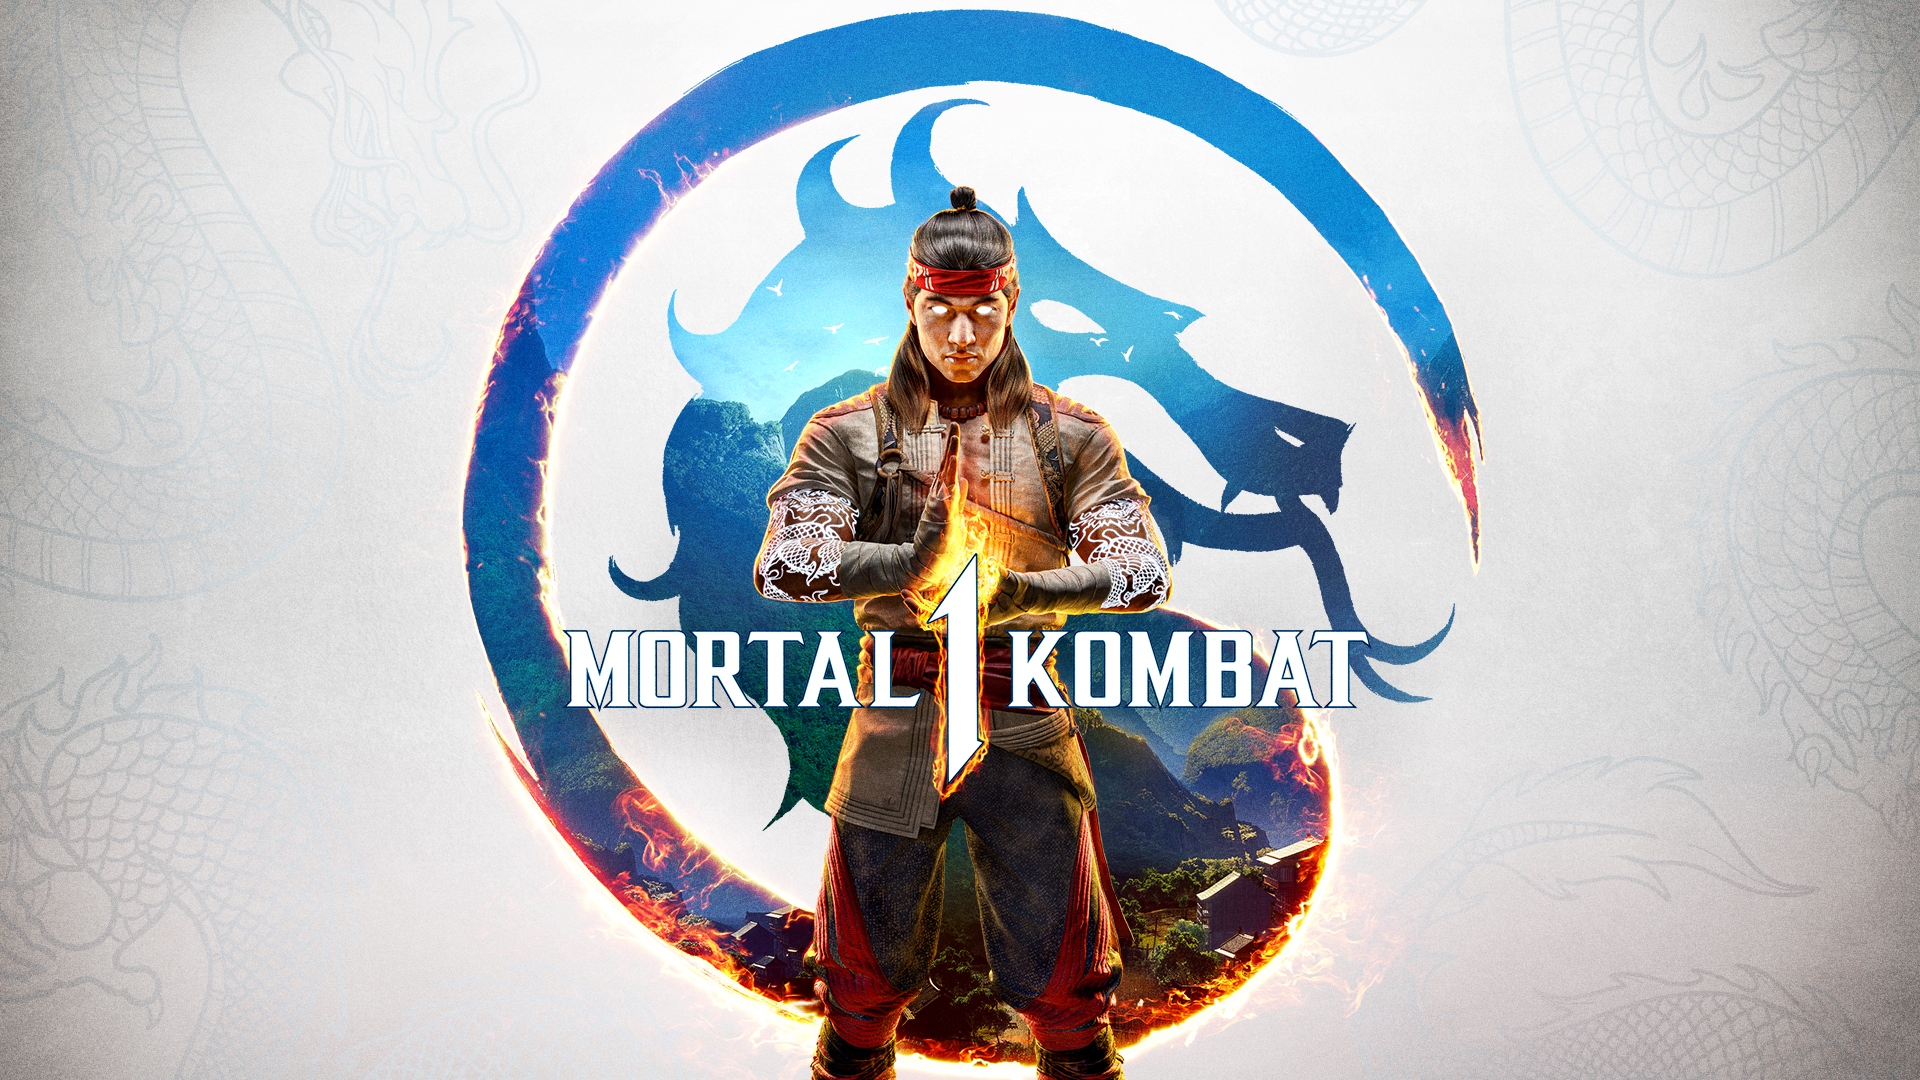 Mortal Kombat 11 receives voice chat via the Nintendo Switch Online app.  Does this mean other third party online multiplayer games will finally  receive this feature too? : r/NintendoSwitch